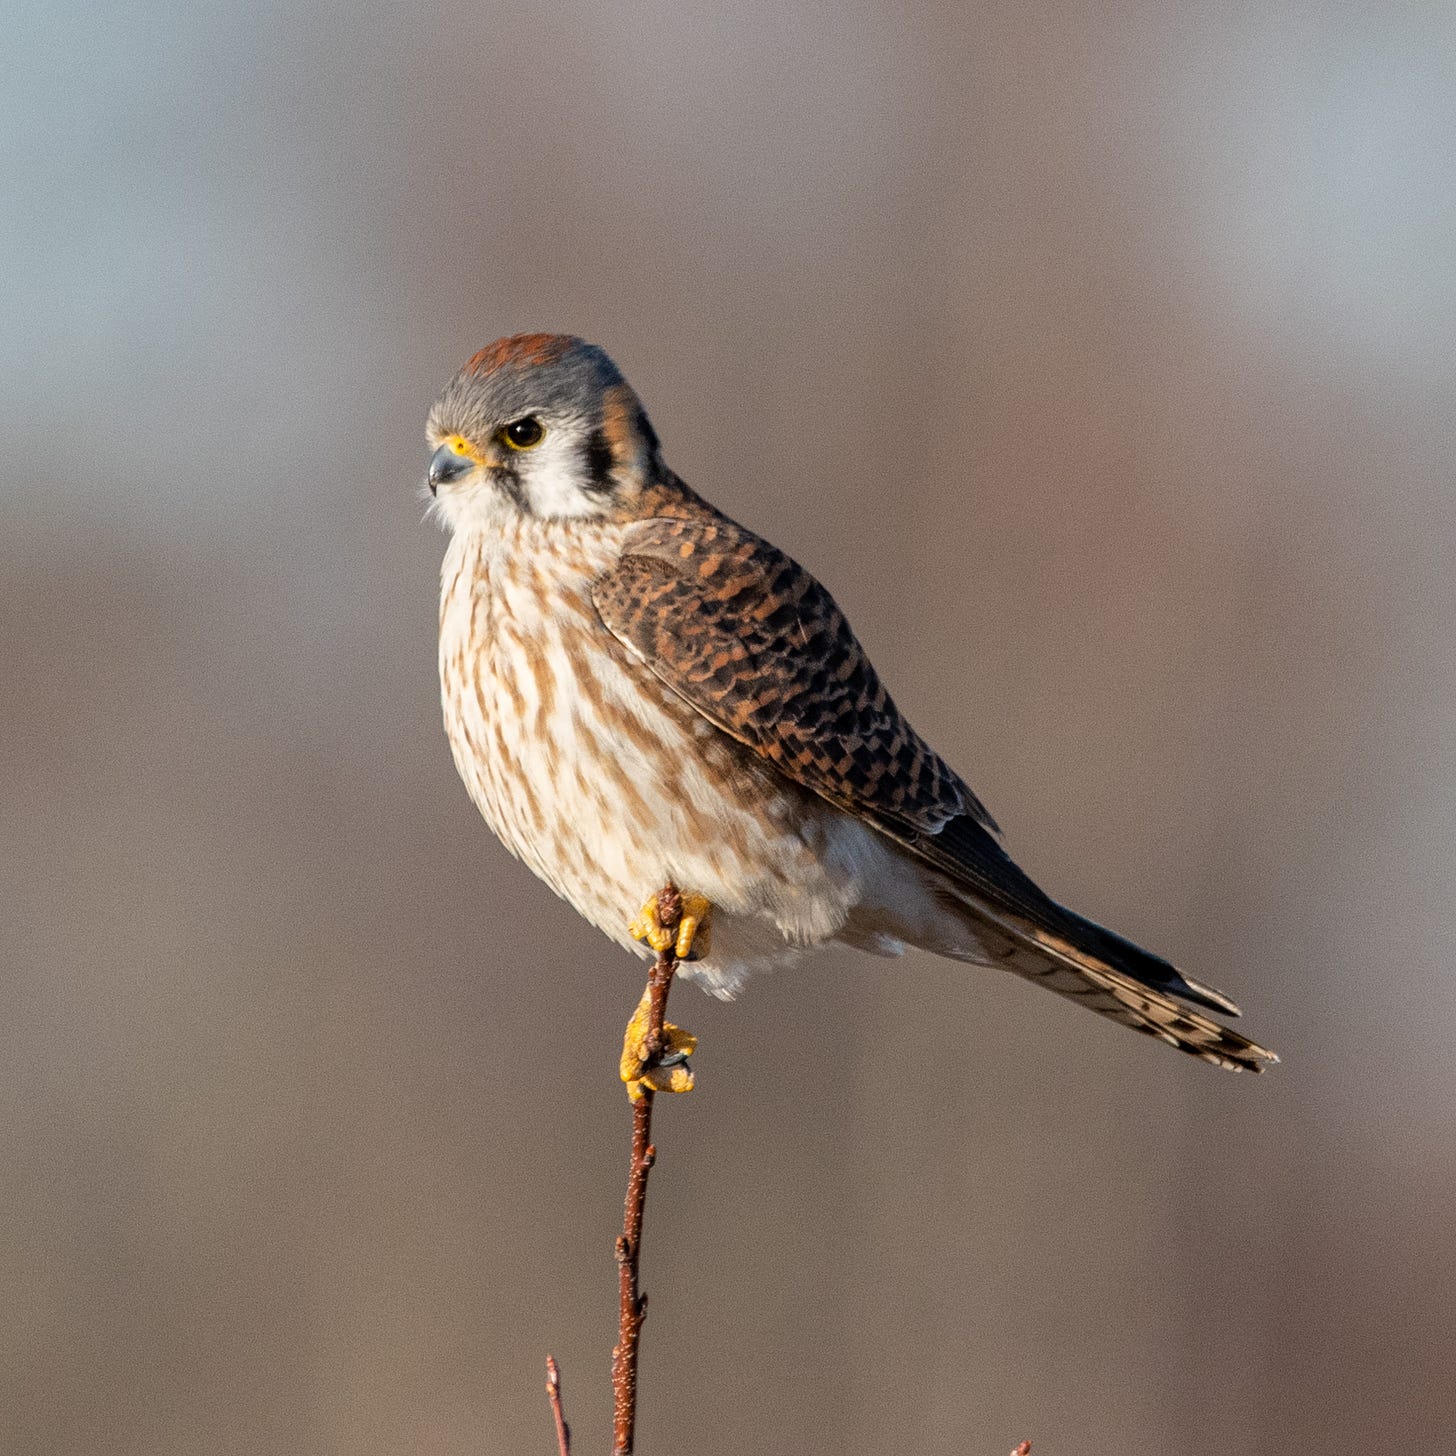 An American kestrel, perched, with a stern look on its face